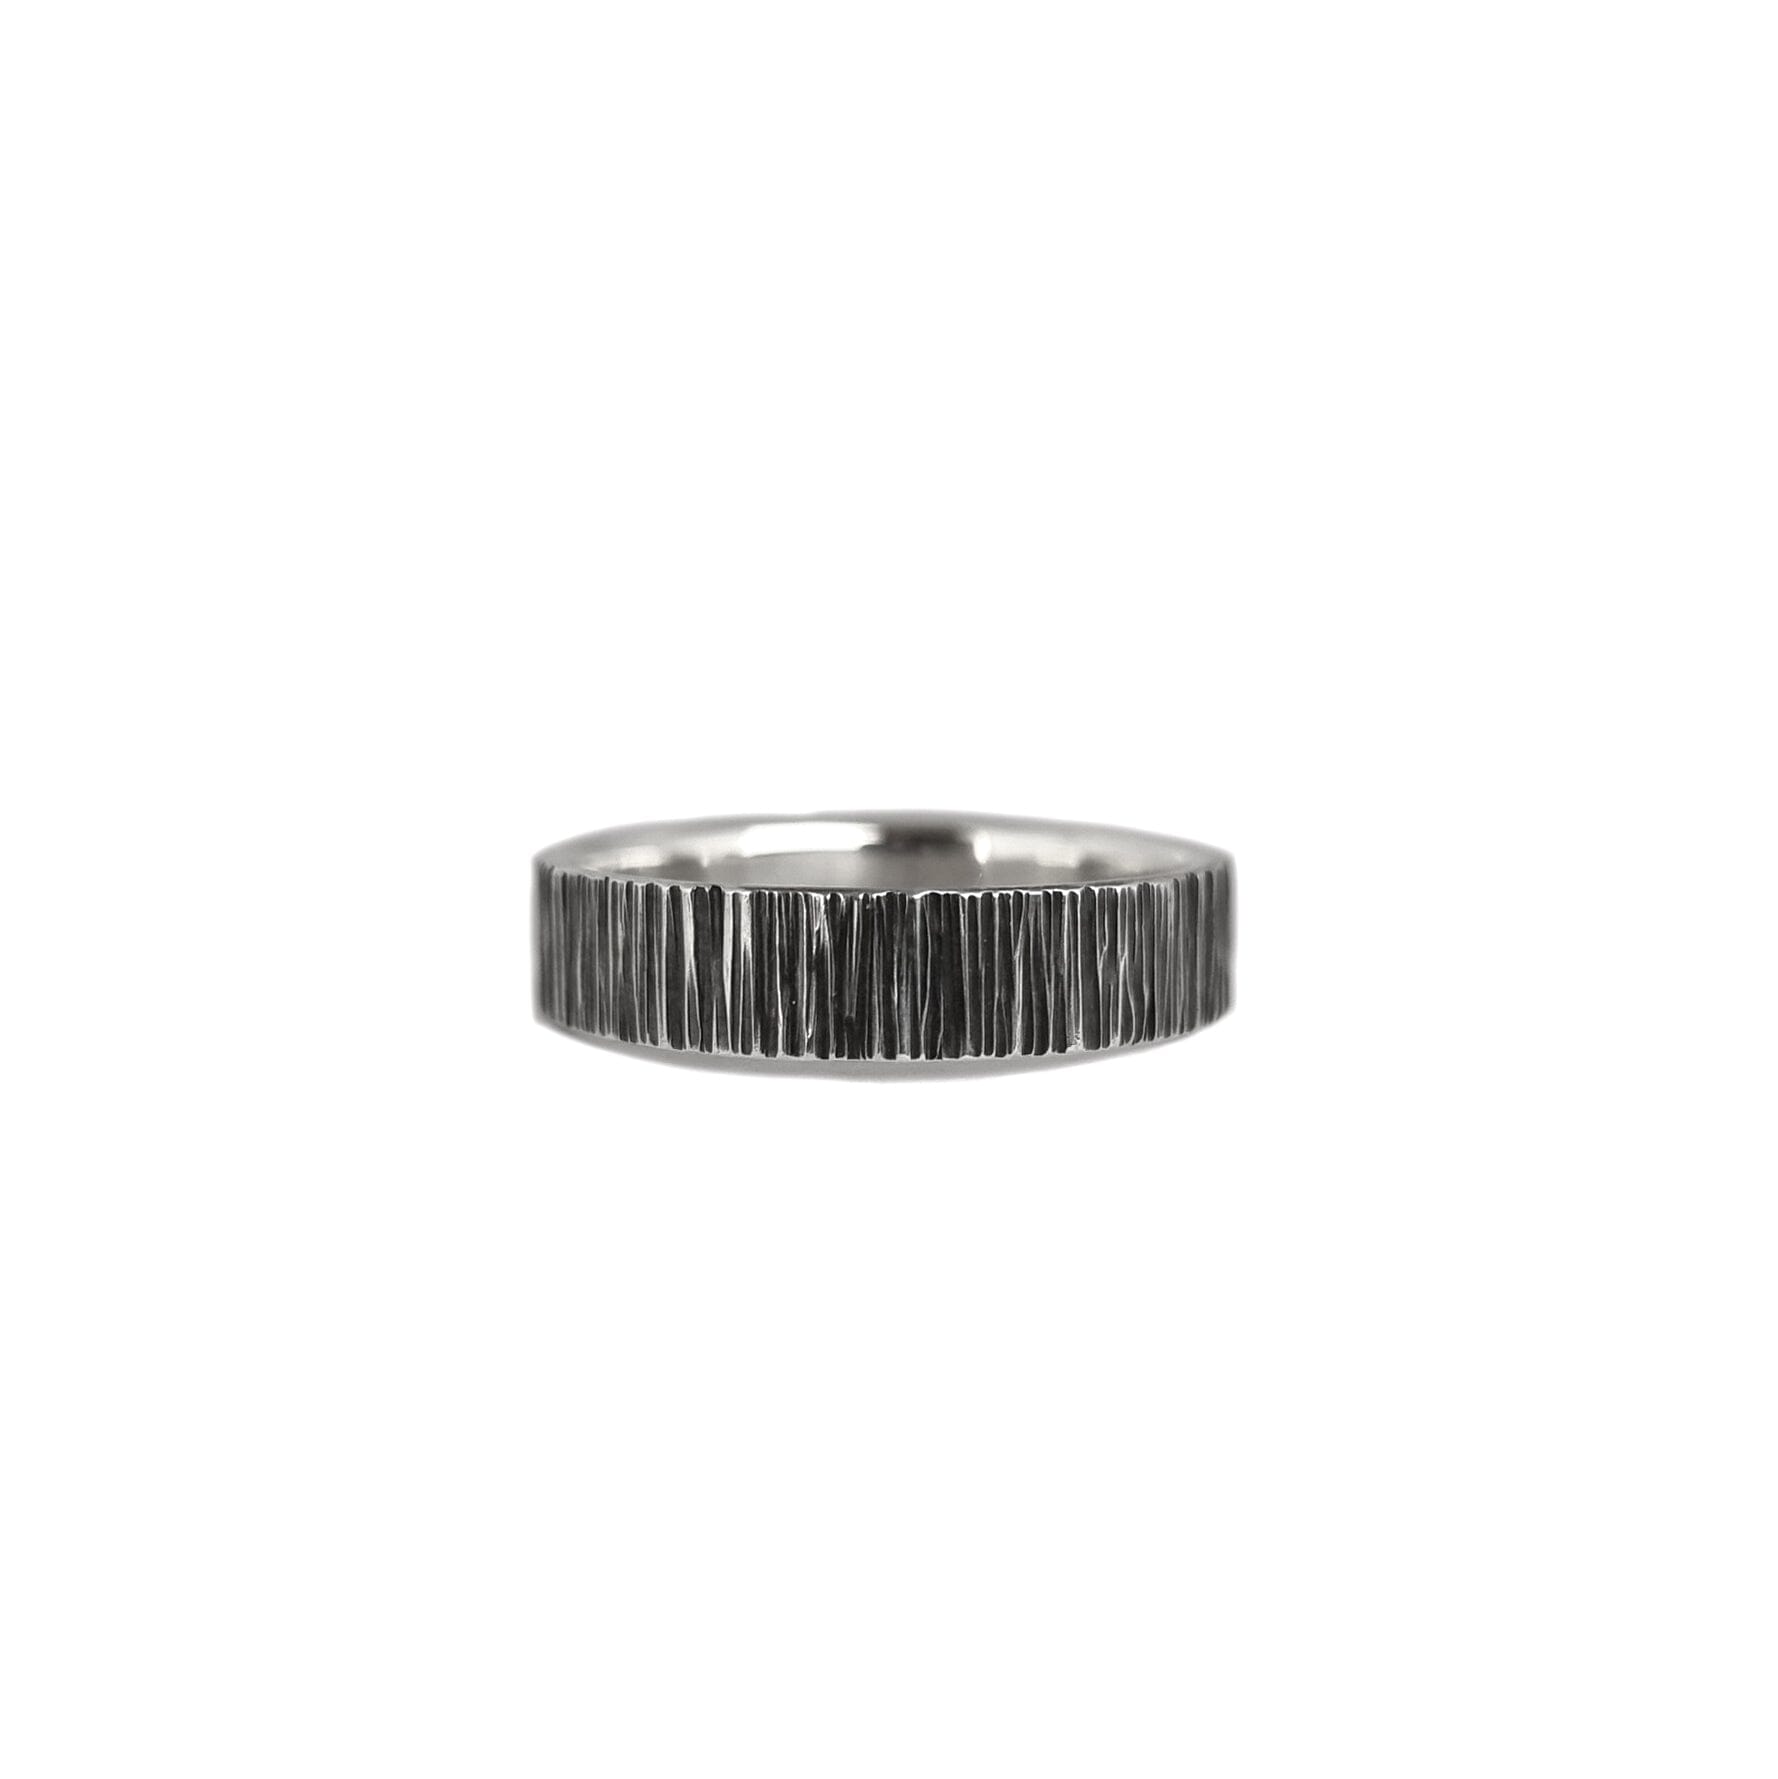 Wide Textured Rings - Emily Eliza Arlotte Ring Emily Eliza Arlotte Oxidised Sterling Silver Size R 1/2 